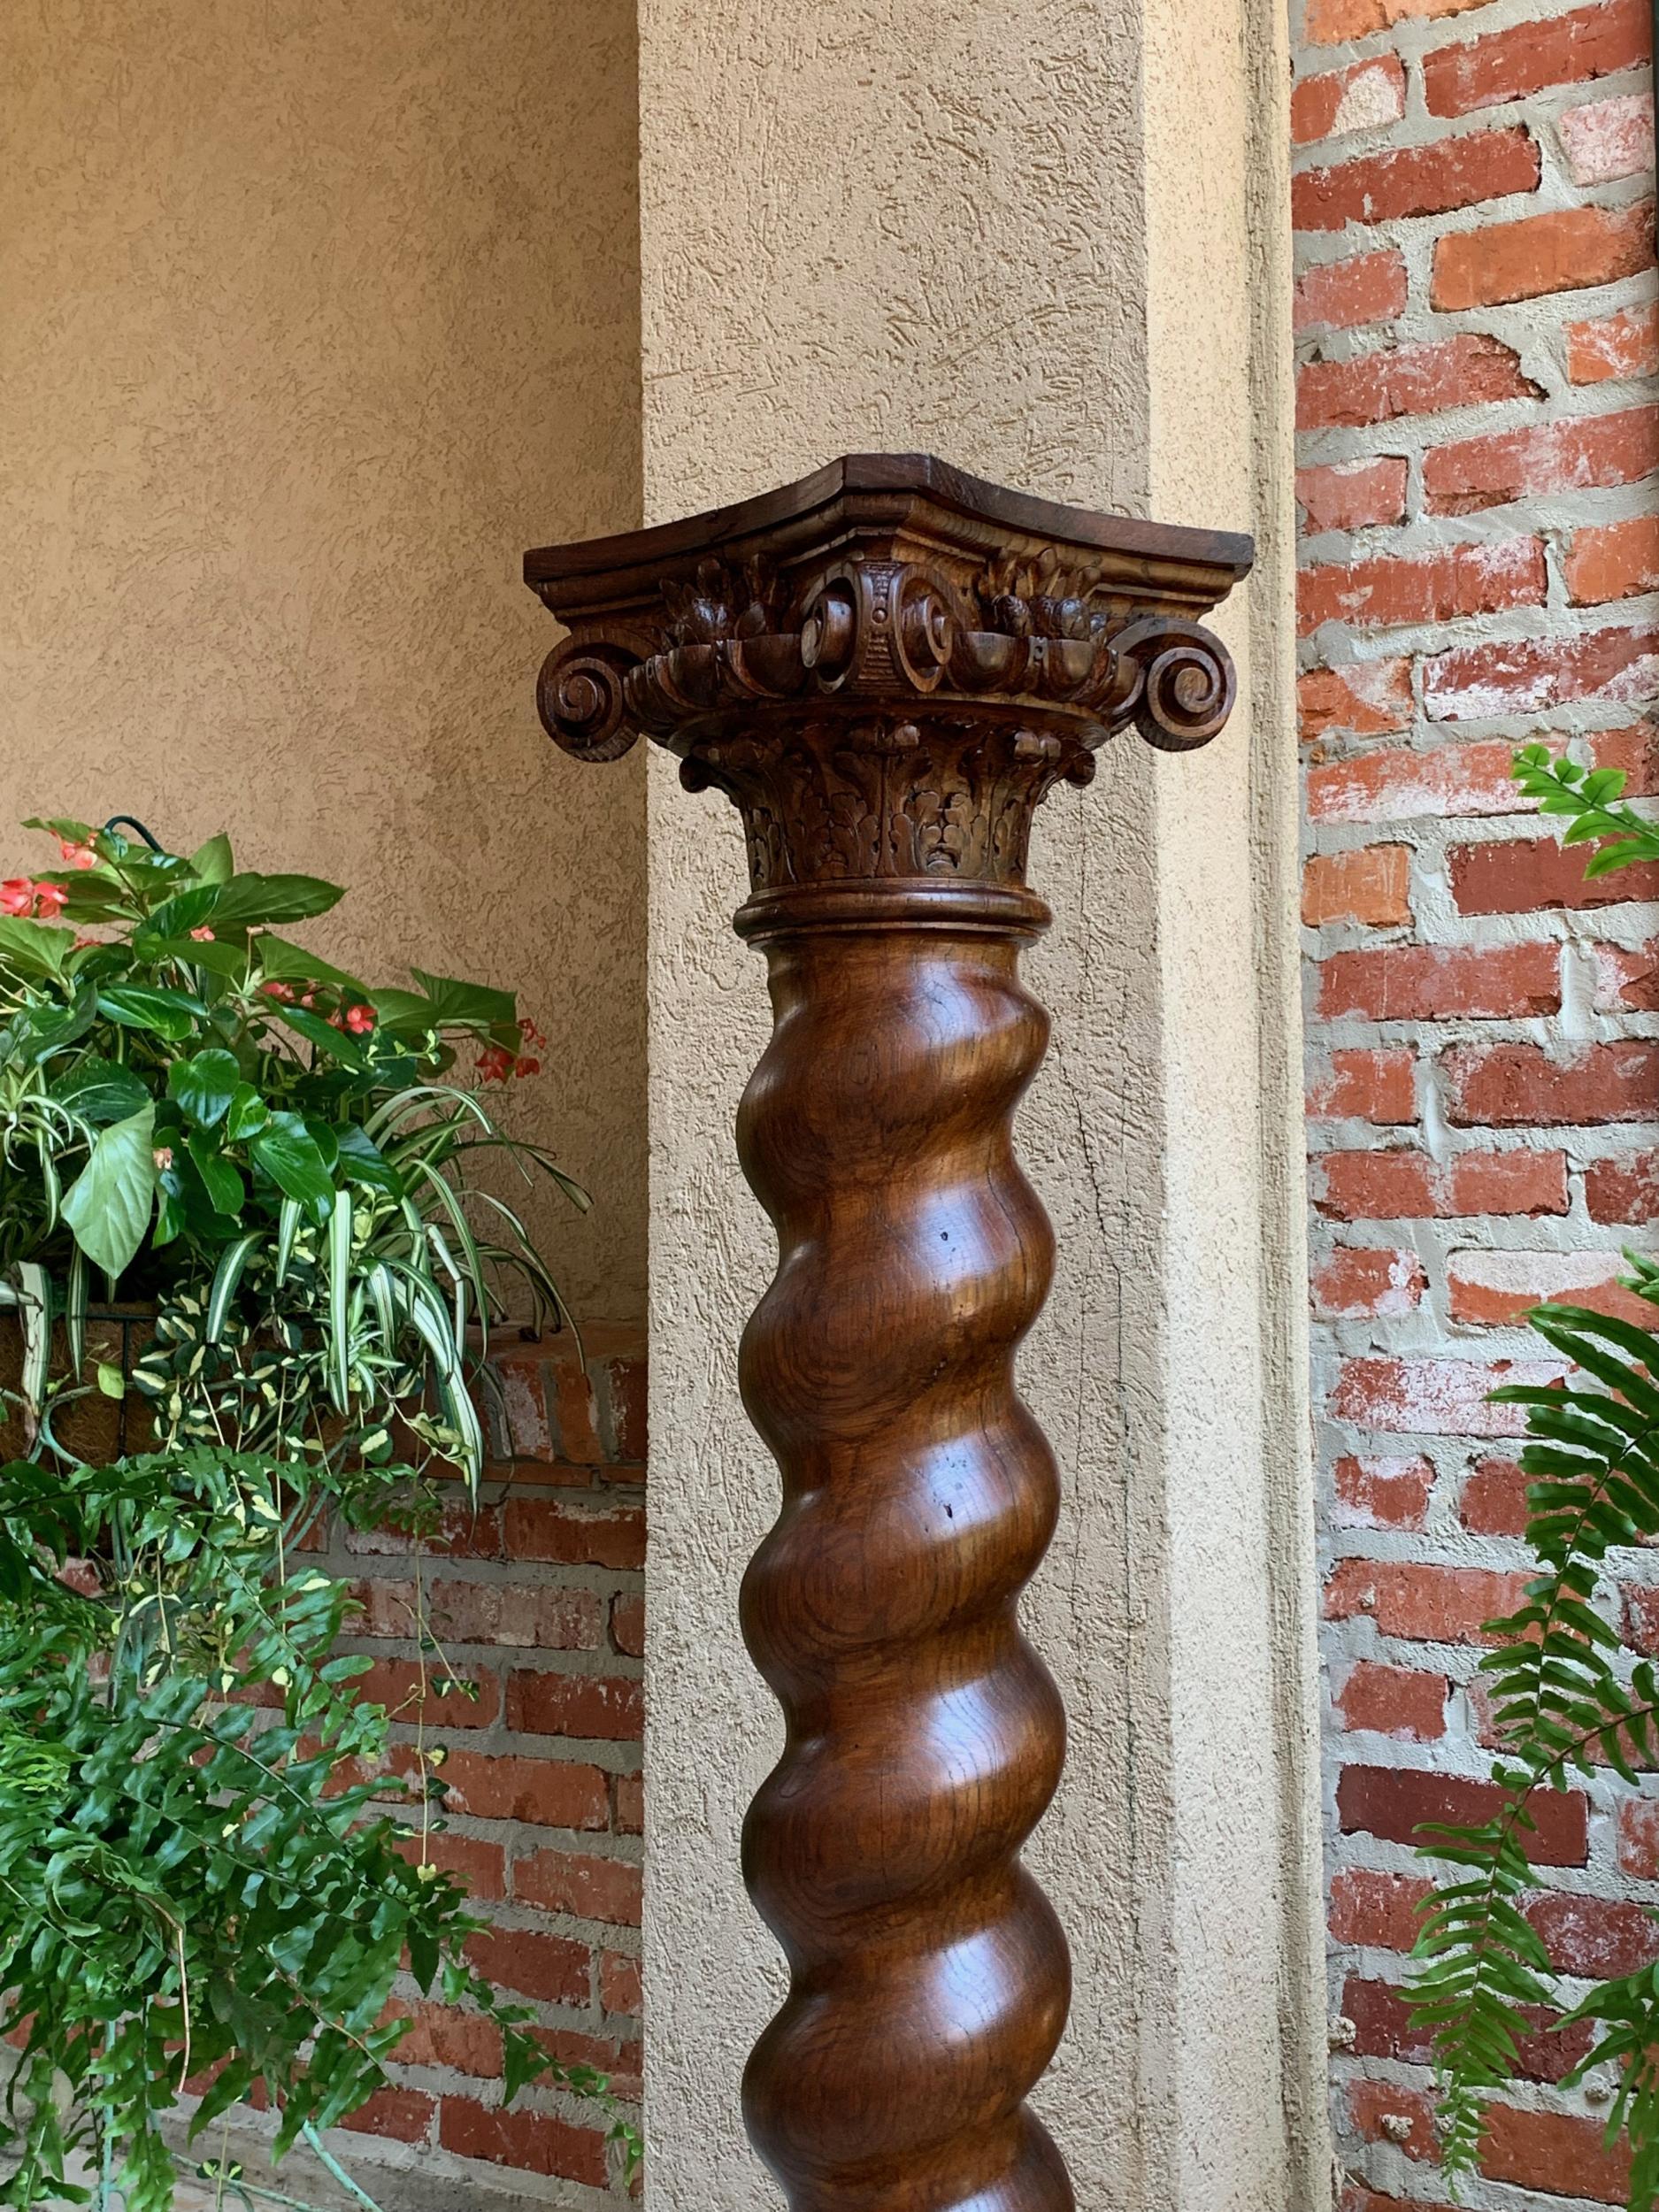 French Provincial 19th century French Carved Oak Barley Twist Column Pedestal Plant Stand Display